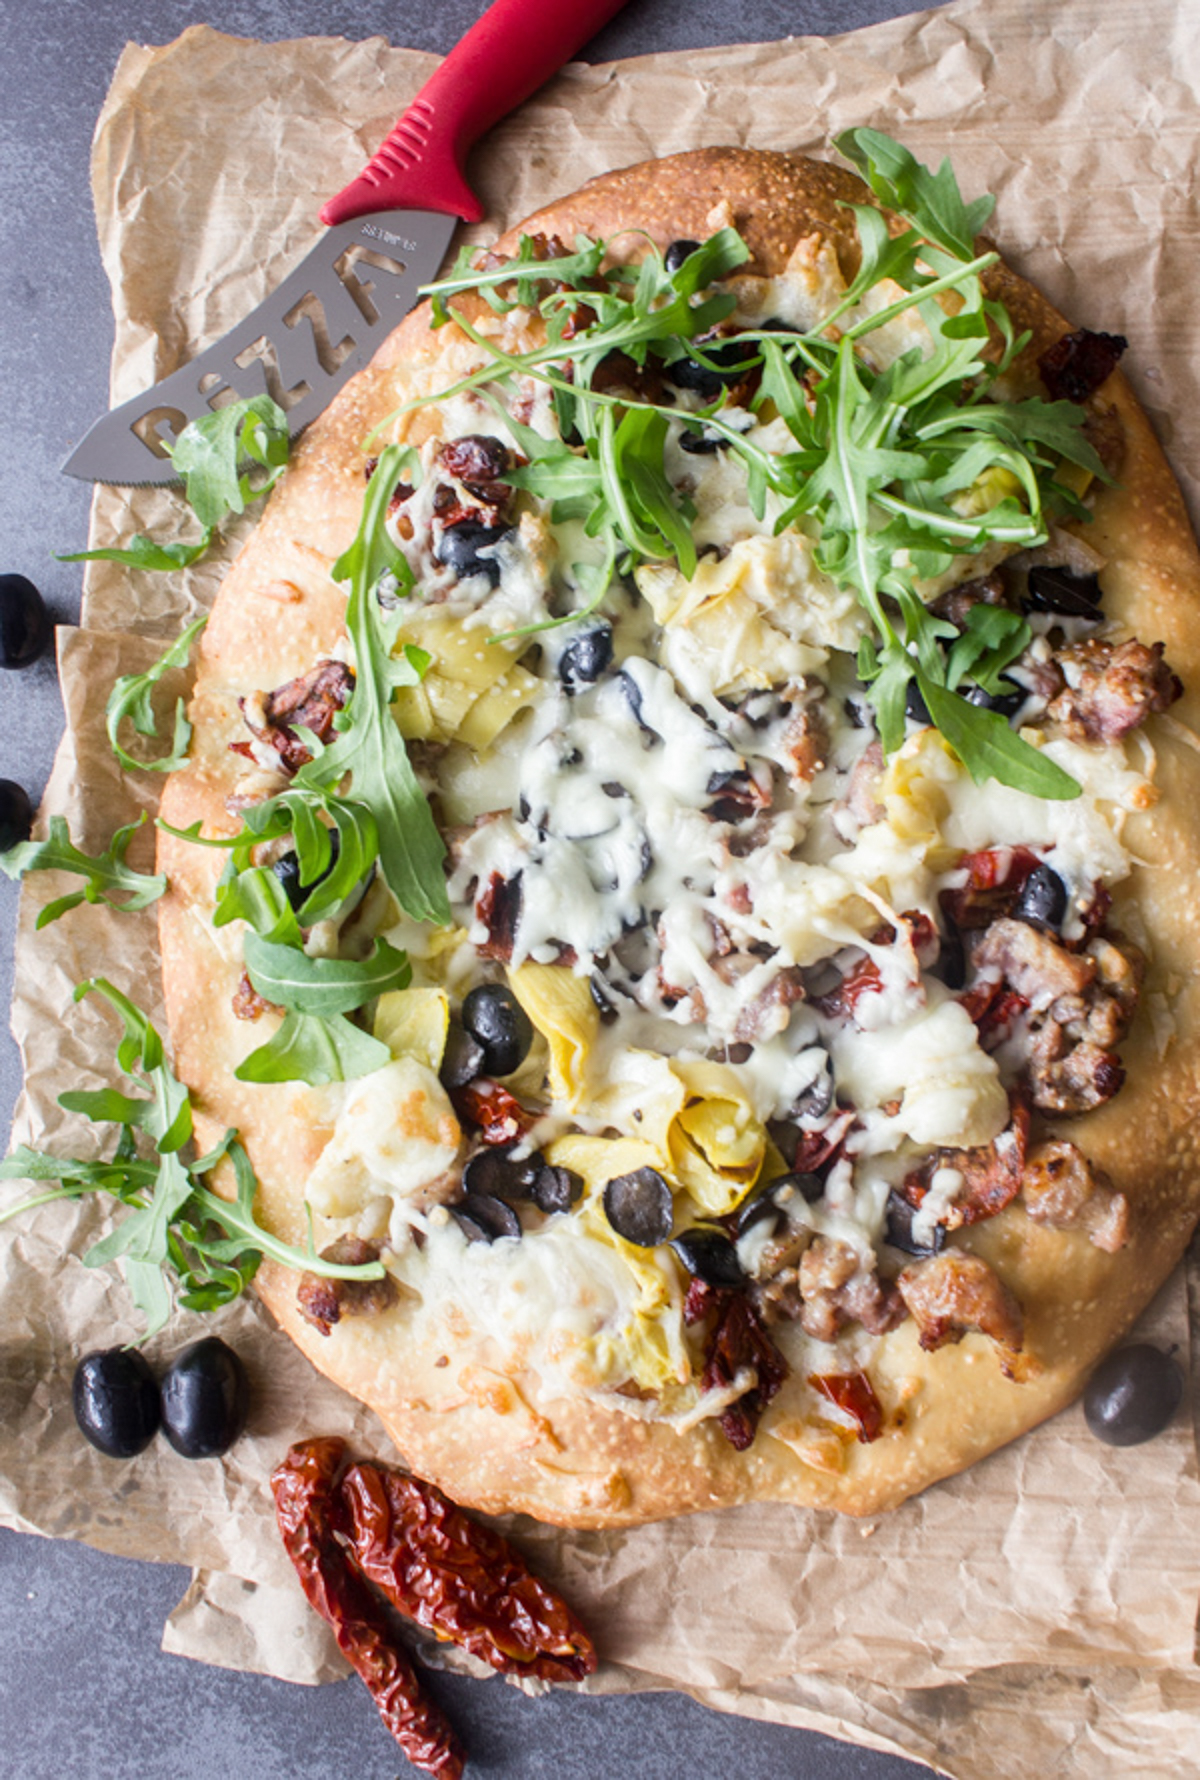 Sausage & arugula pizza on a brown paper.